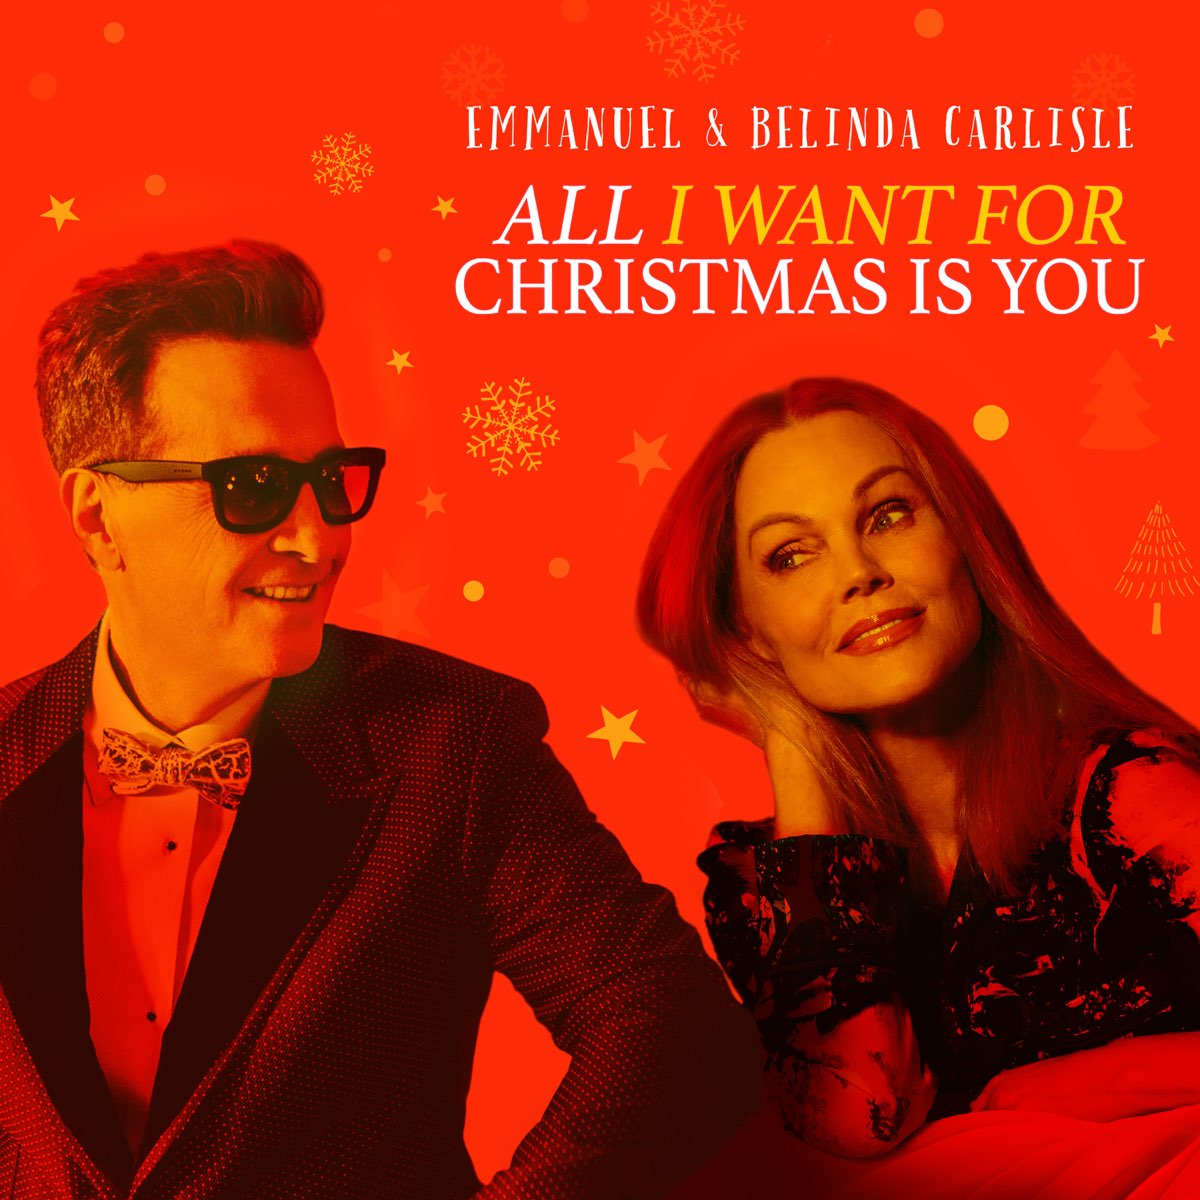 Emmanuel ft. featuring Belinda Carlisle All I Want For Christmas Is You cover artwork